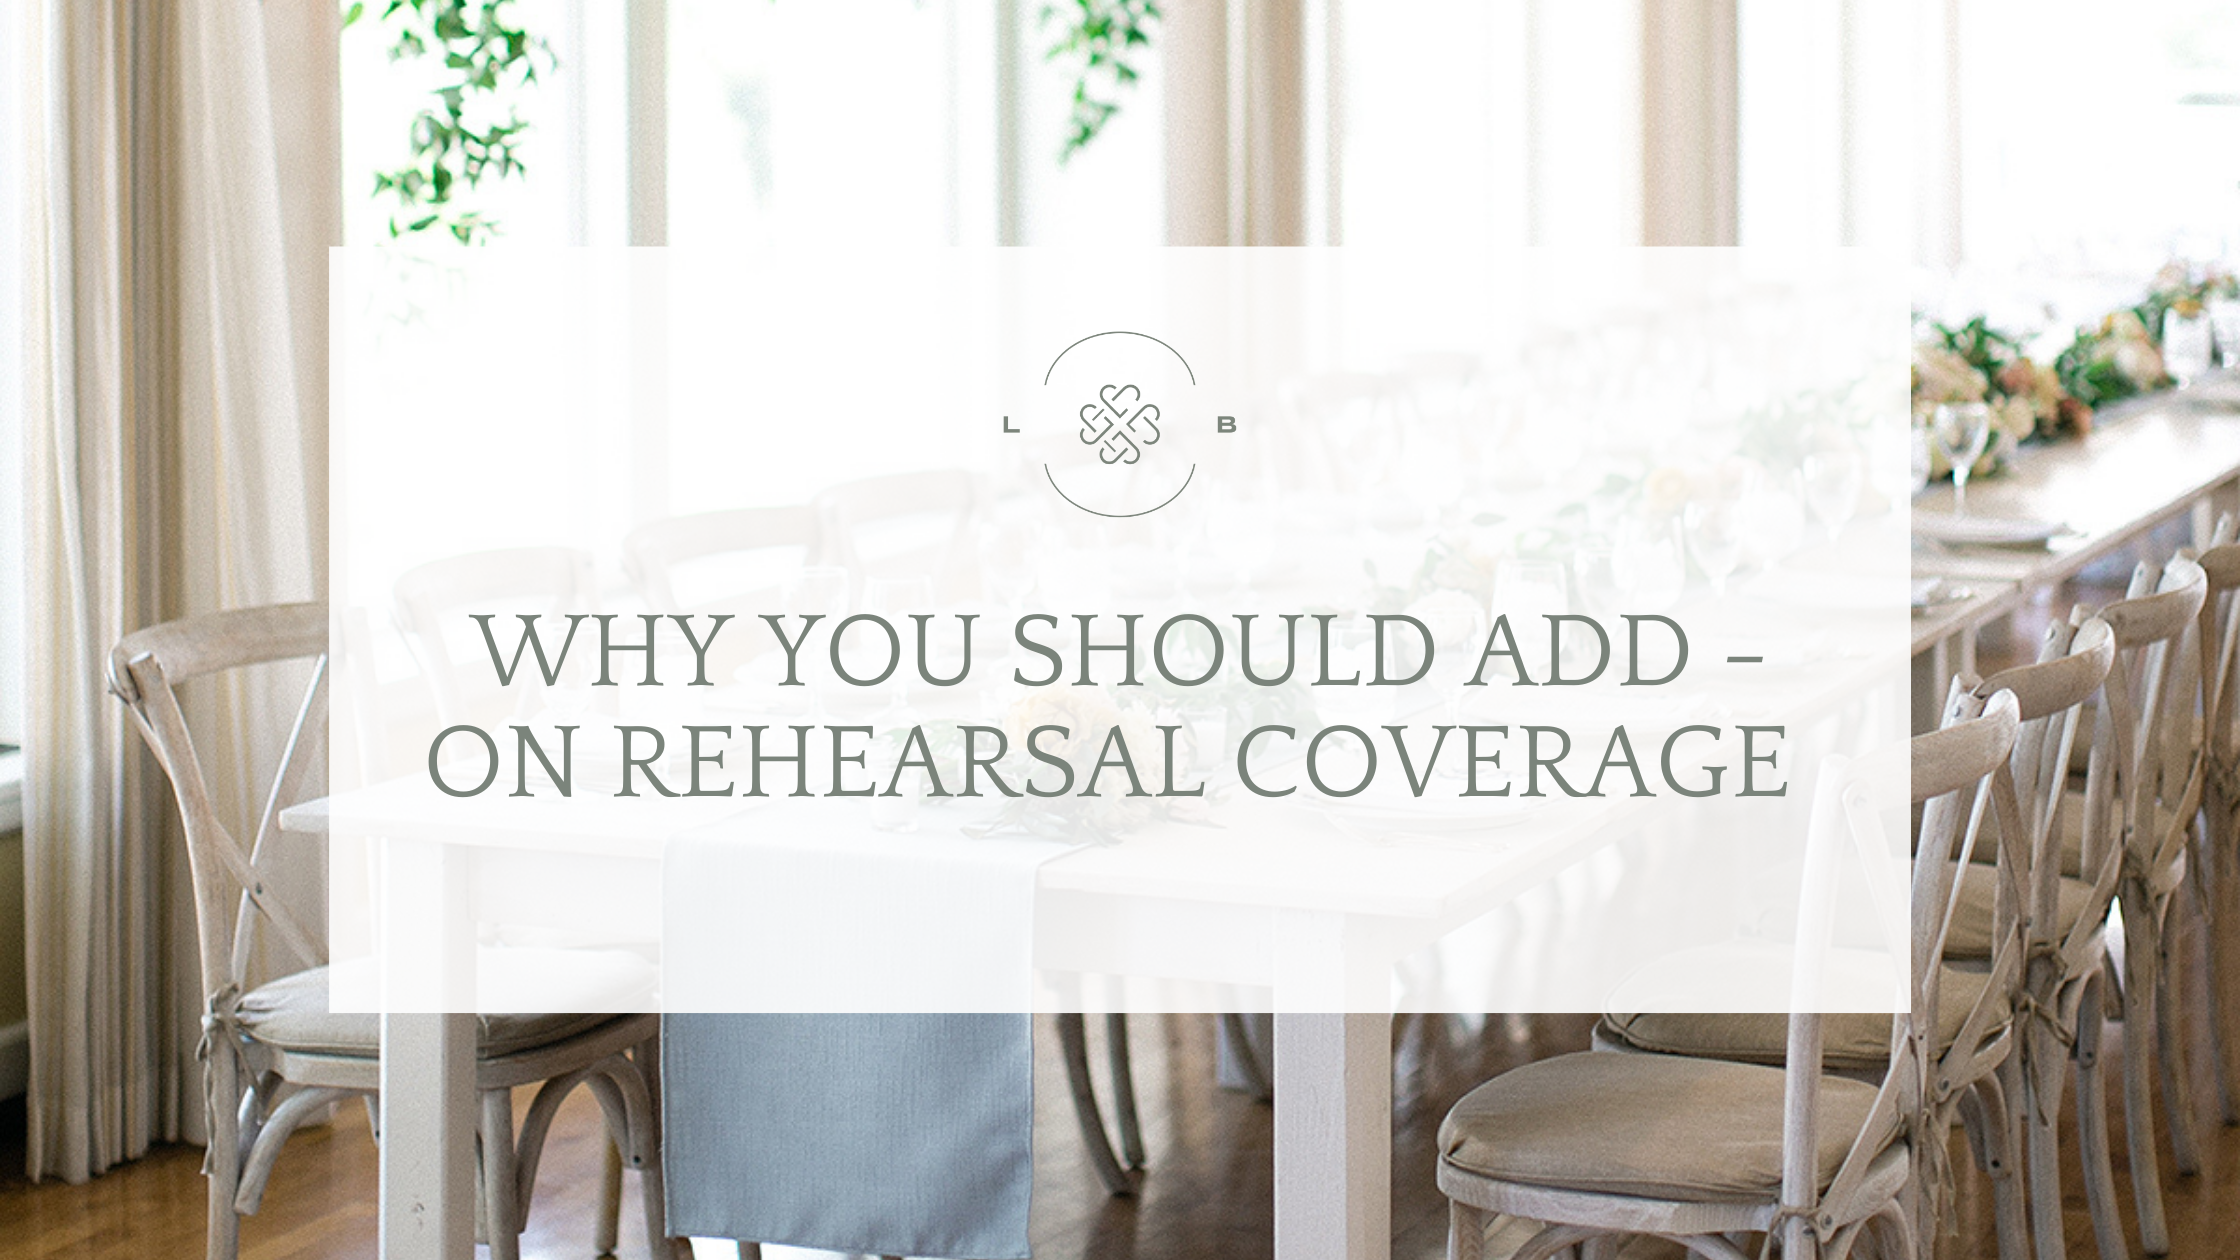 Wedding rehearsal coverage, wedding add-ons, wedding collection inspiration